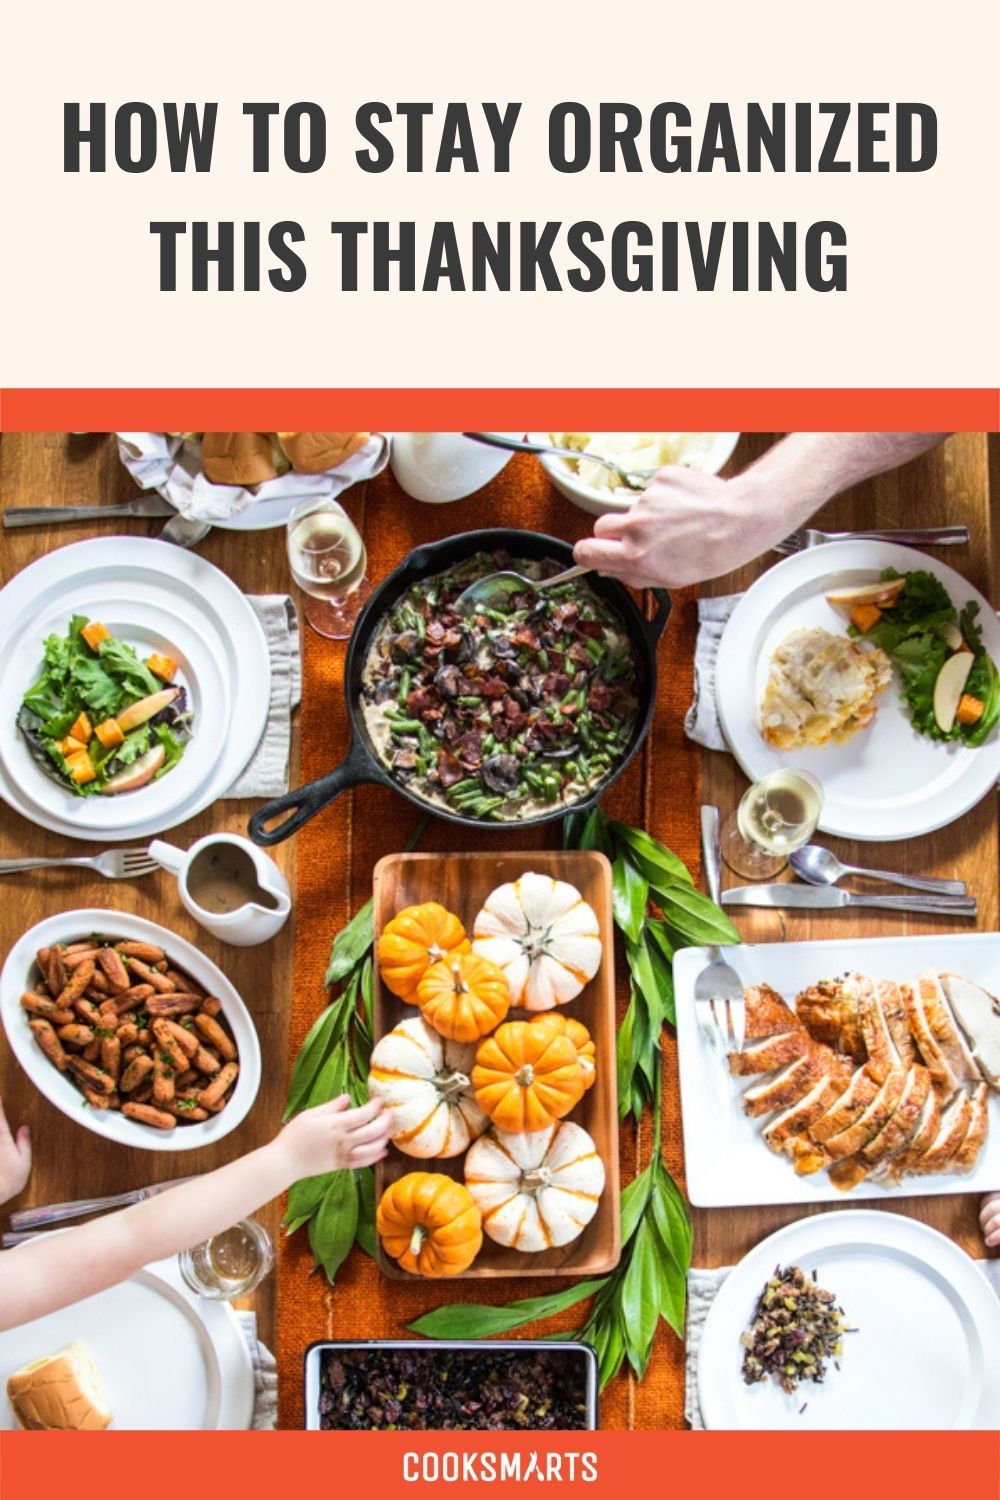 5 Tips for a More Organized Thanksgiving | Cook Smarts